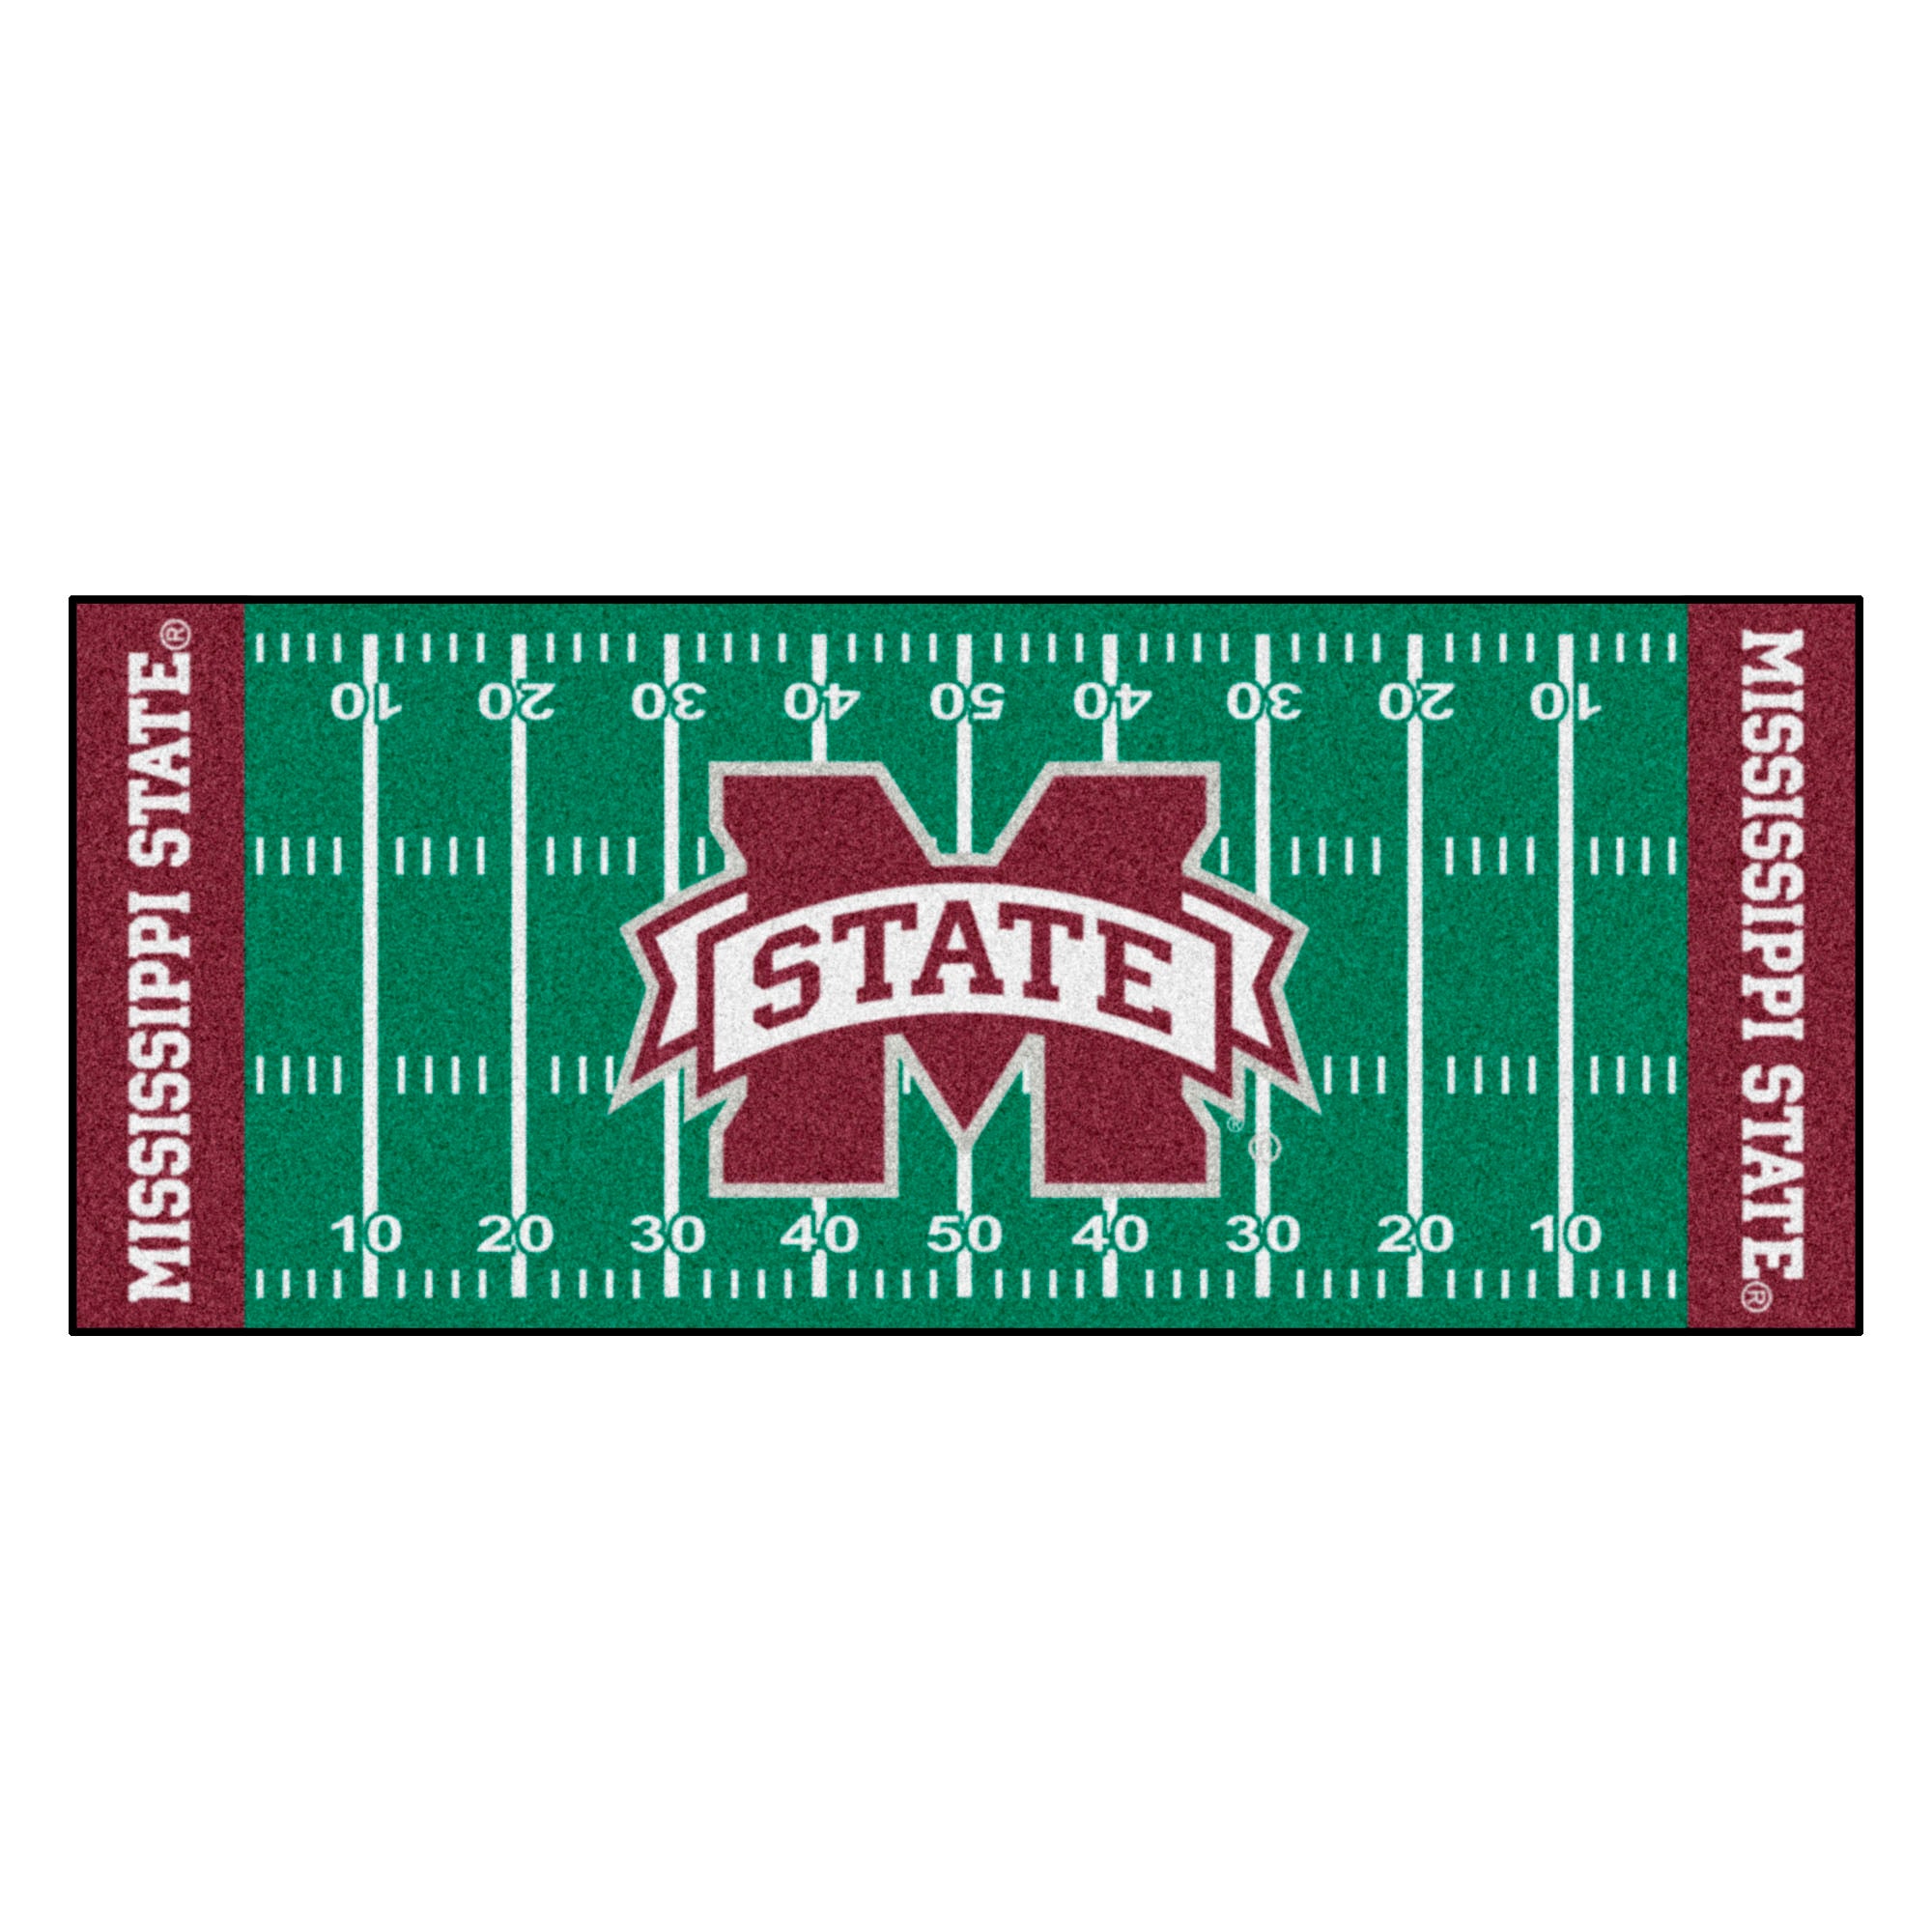 FANMATS, Mississippi State University Field Runner Mat - 30in. x 72in.